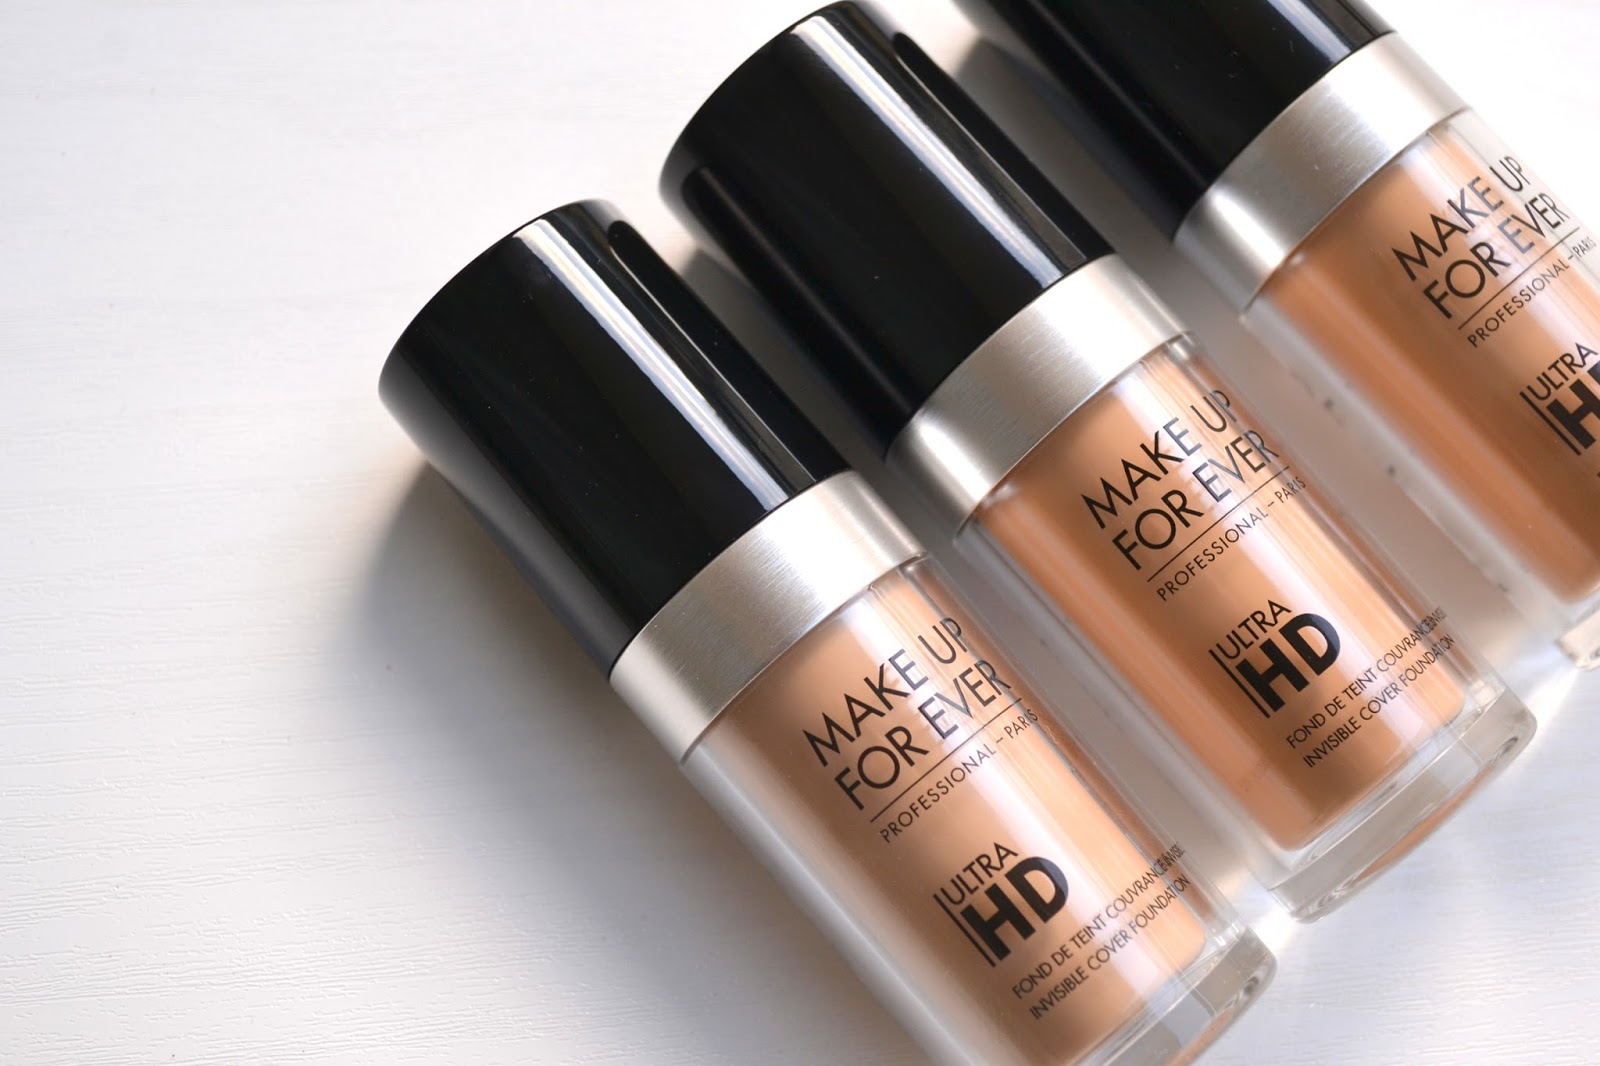 MAKEUP | Make Up For Ever Ultra HD Invisible Cover Foundation in Y235, Y245 and Review, Swatches and Pretty | Cosmetic Proof | Vancouver beauty, nail art and lifestyle blog